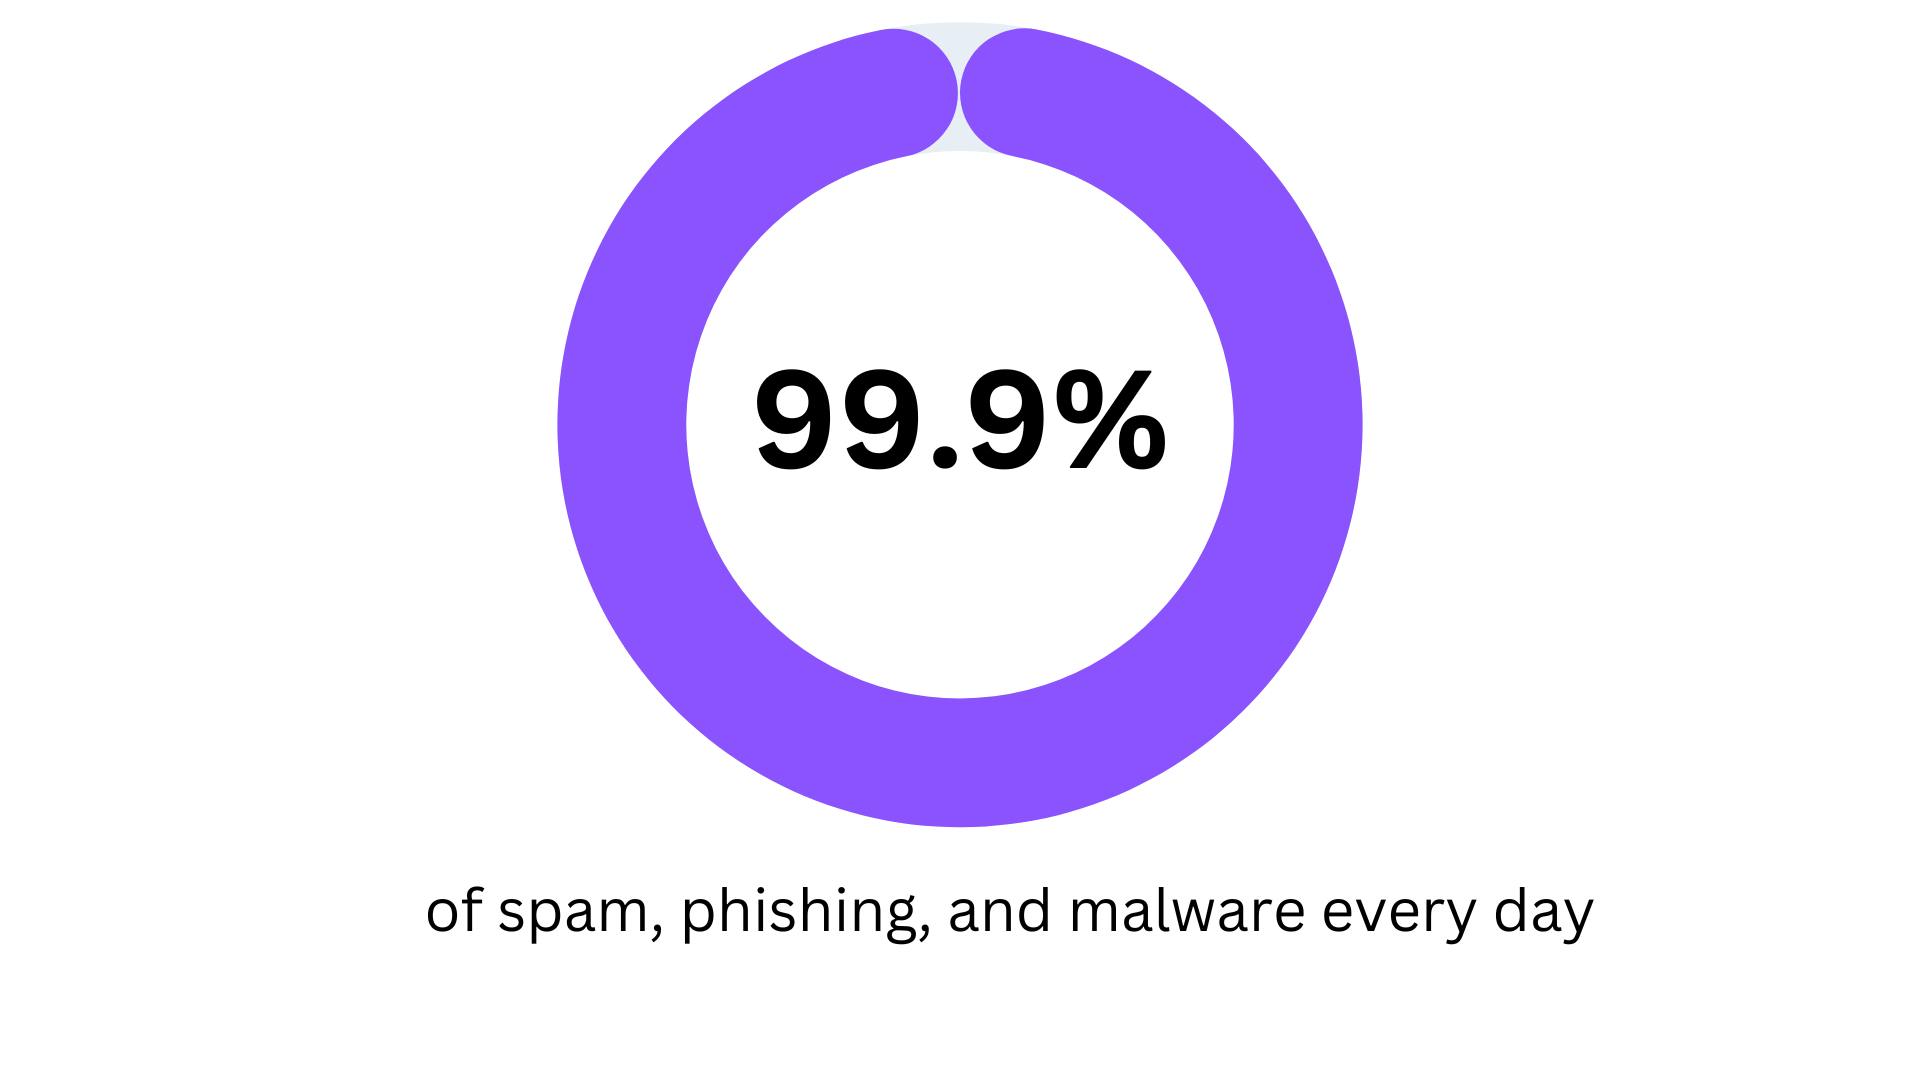 Cybersecurity Statistics - The daily influx of spam, phishing, and malware in the cyber world: